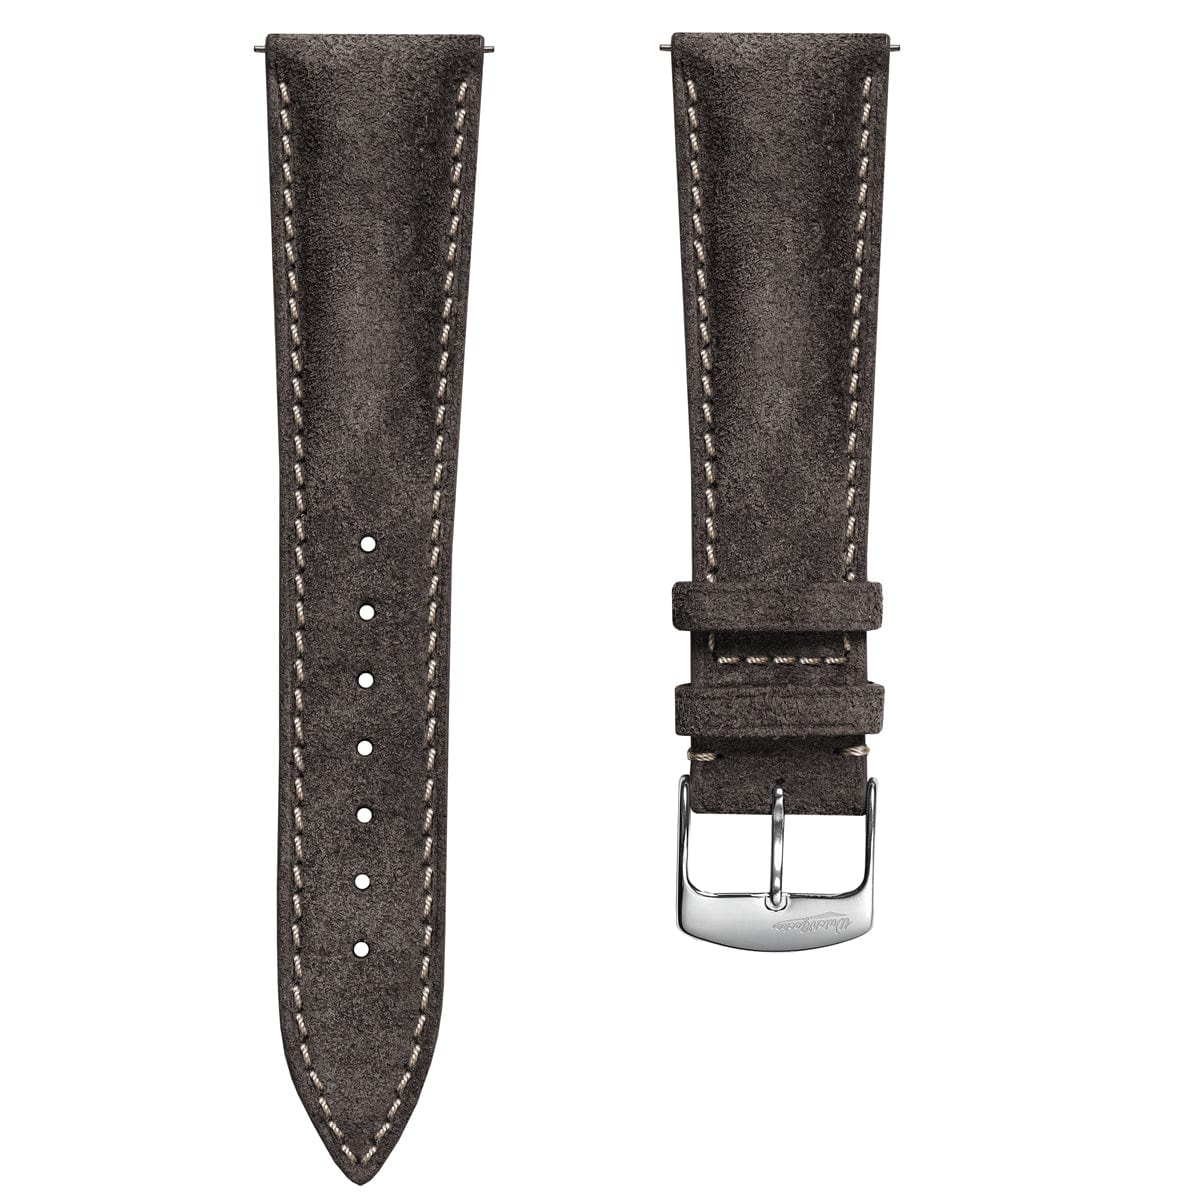 Stanton Conceria Opera Suede Padded Watch Strap - Taupe